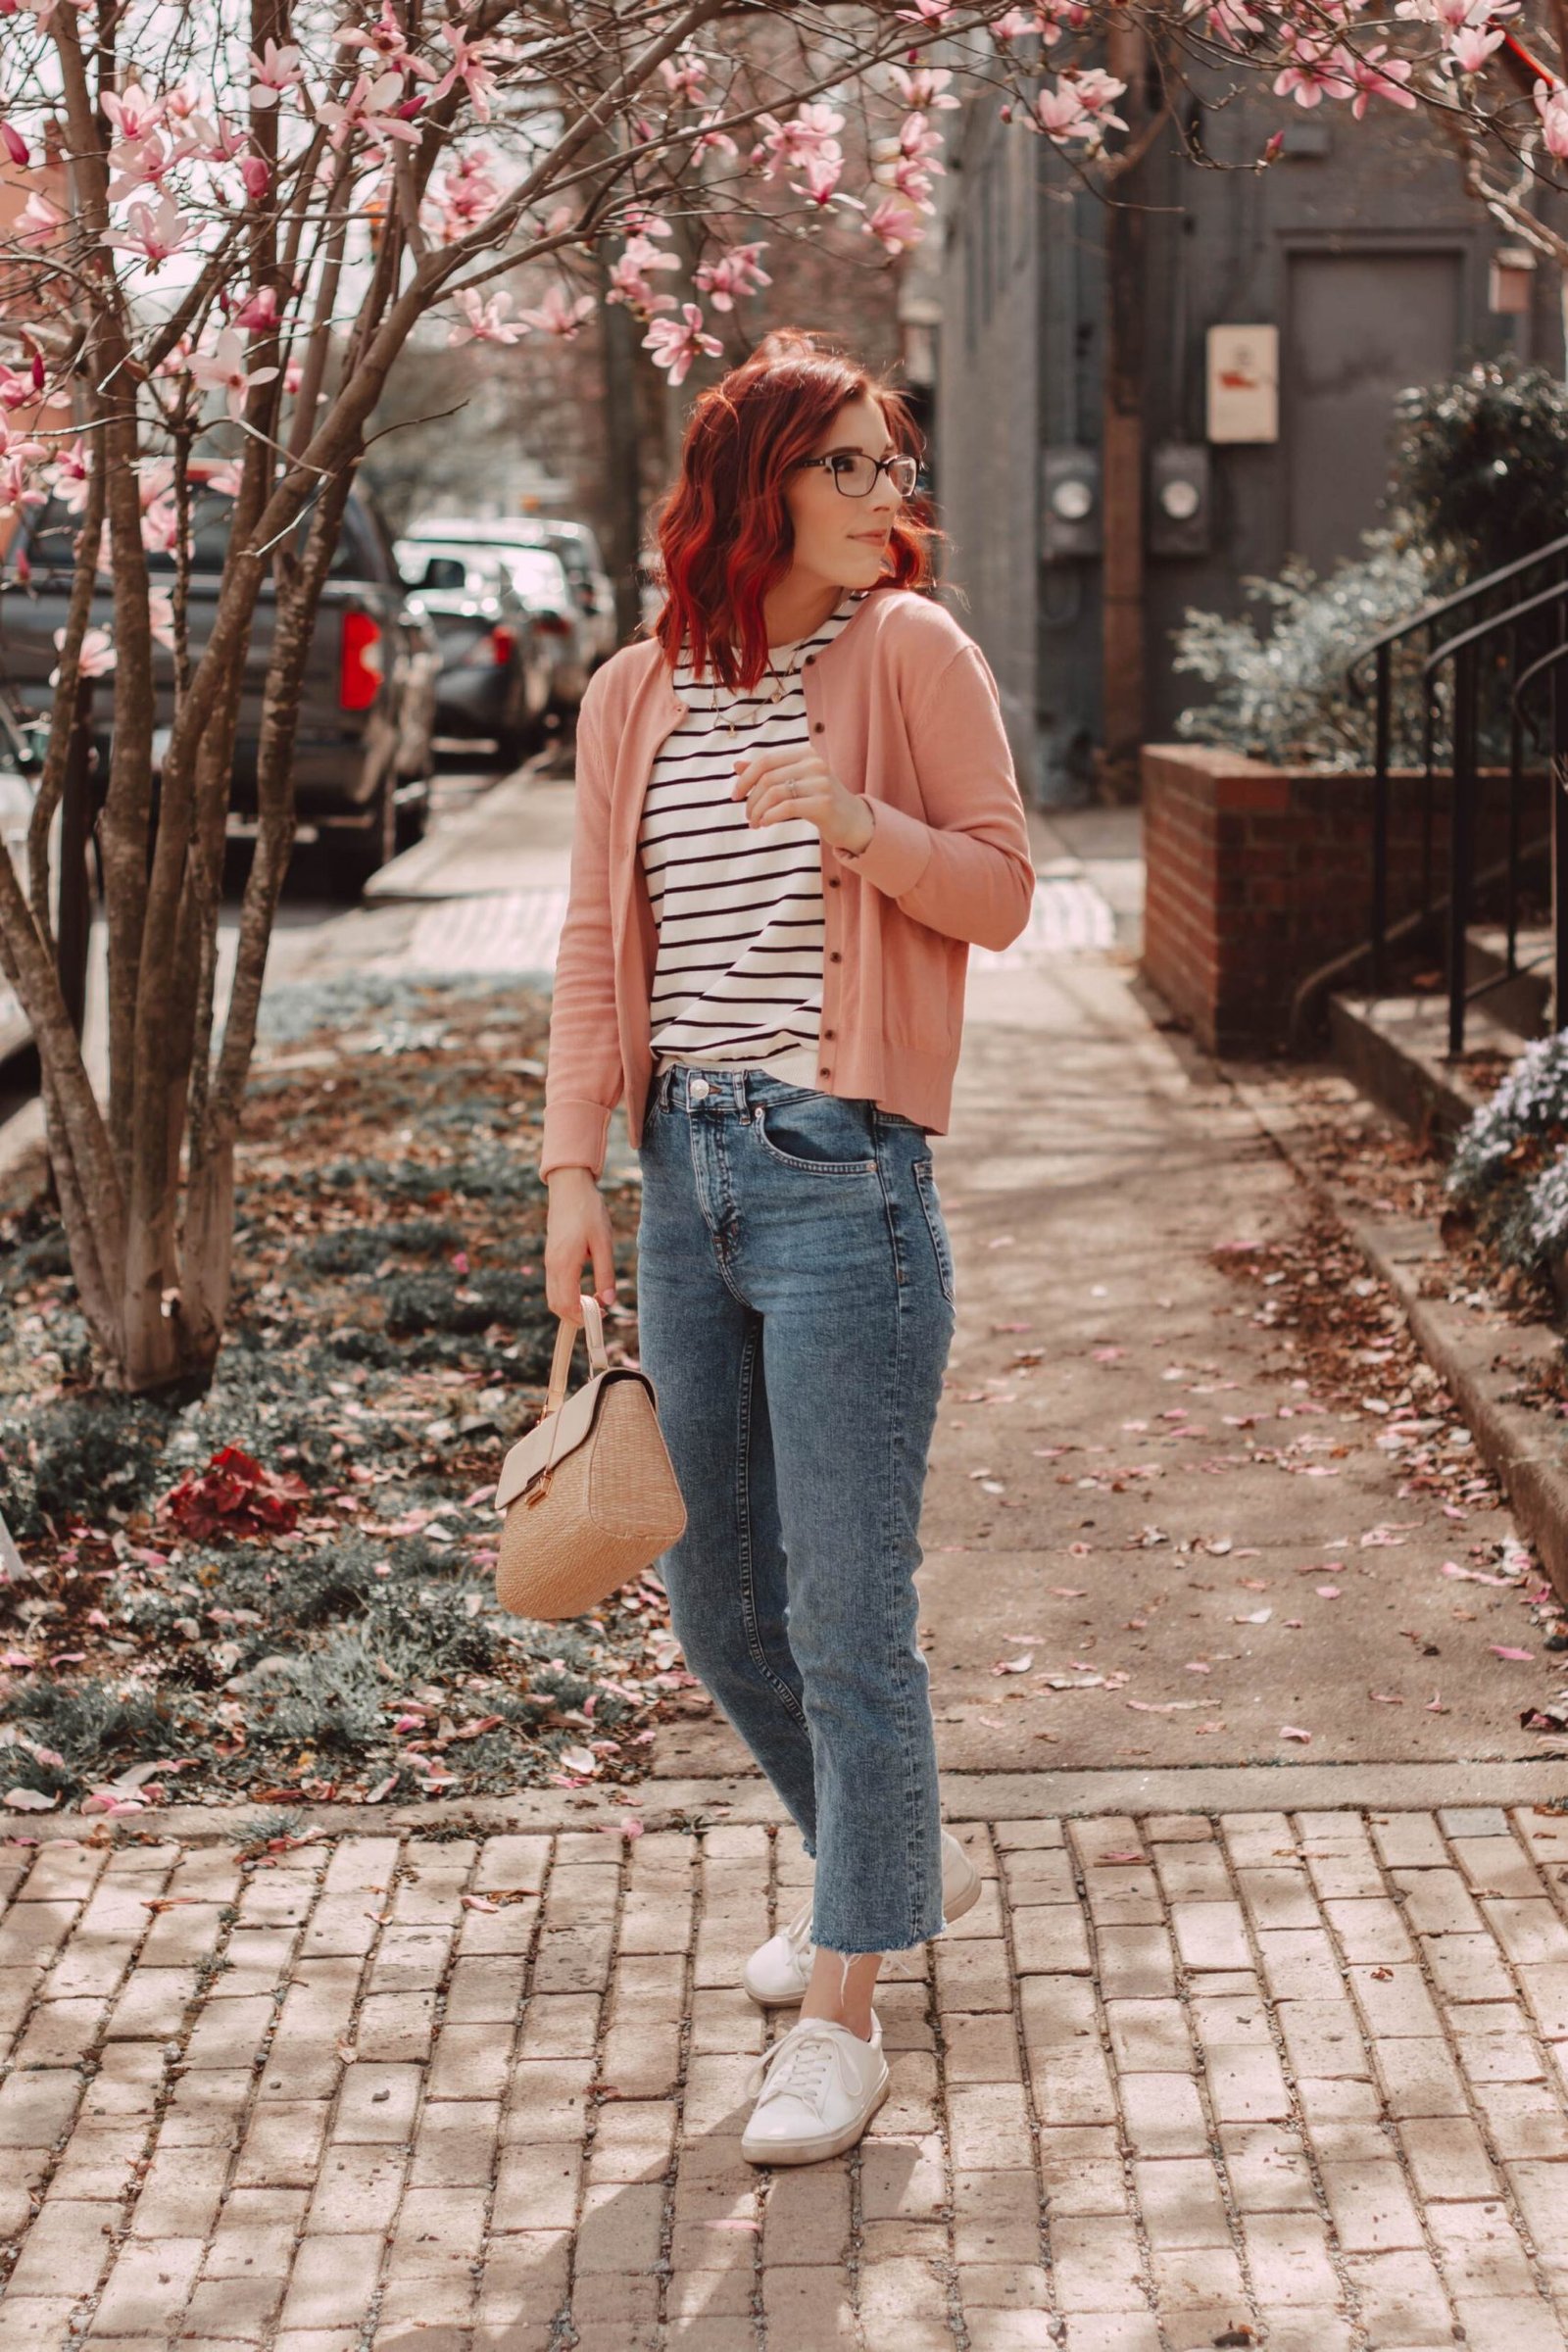 How To Style Black High Waisted Jeans With Crop Top - Daily Sweetness